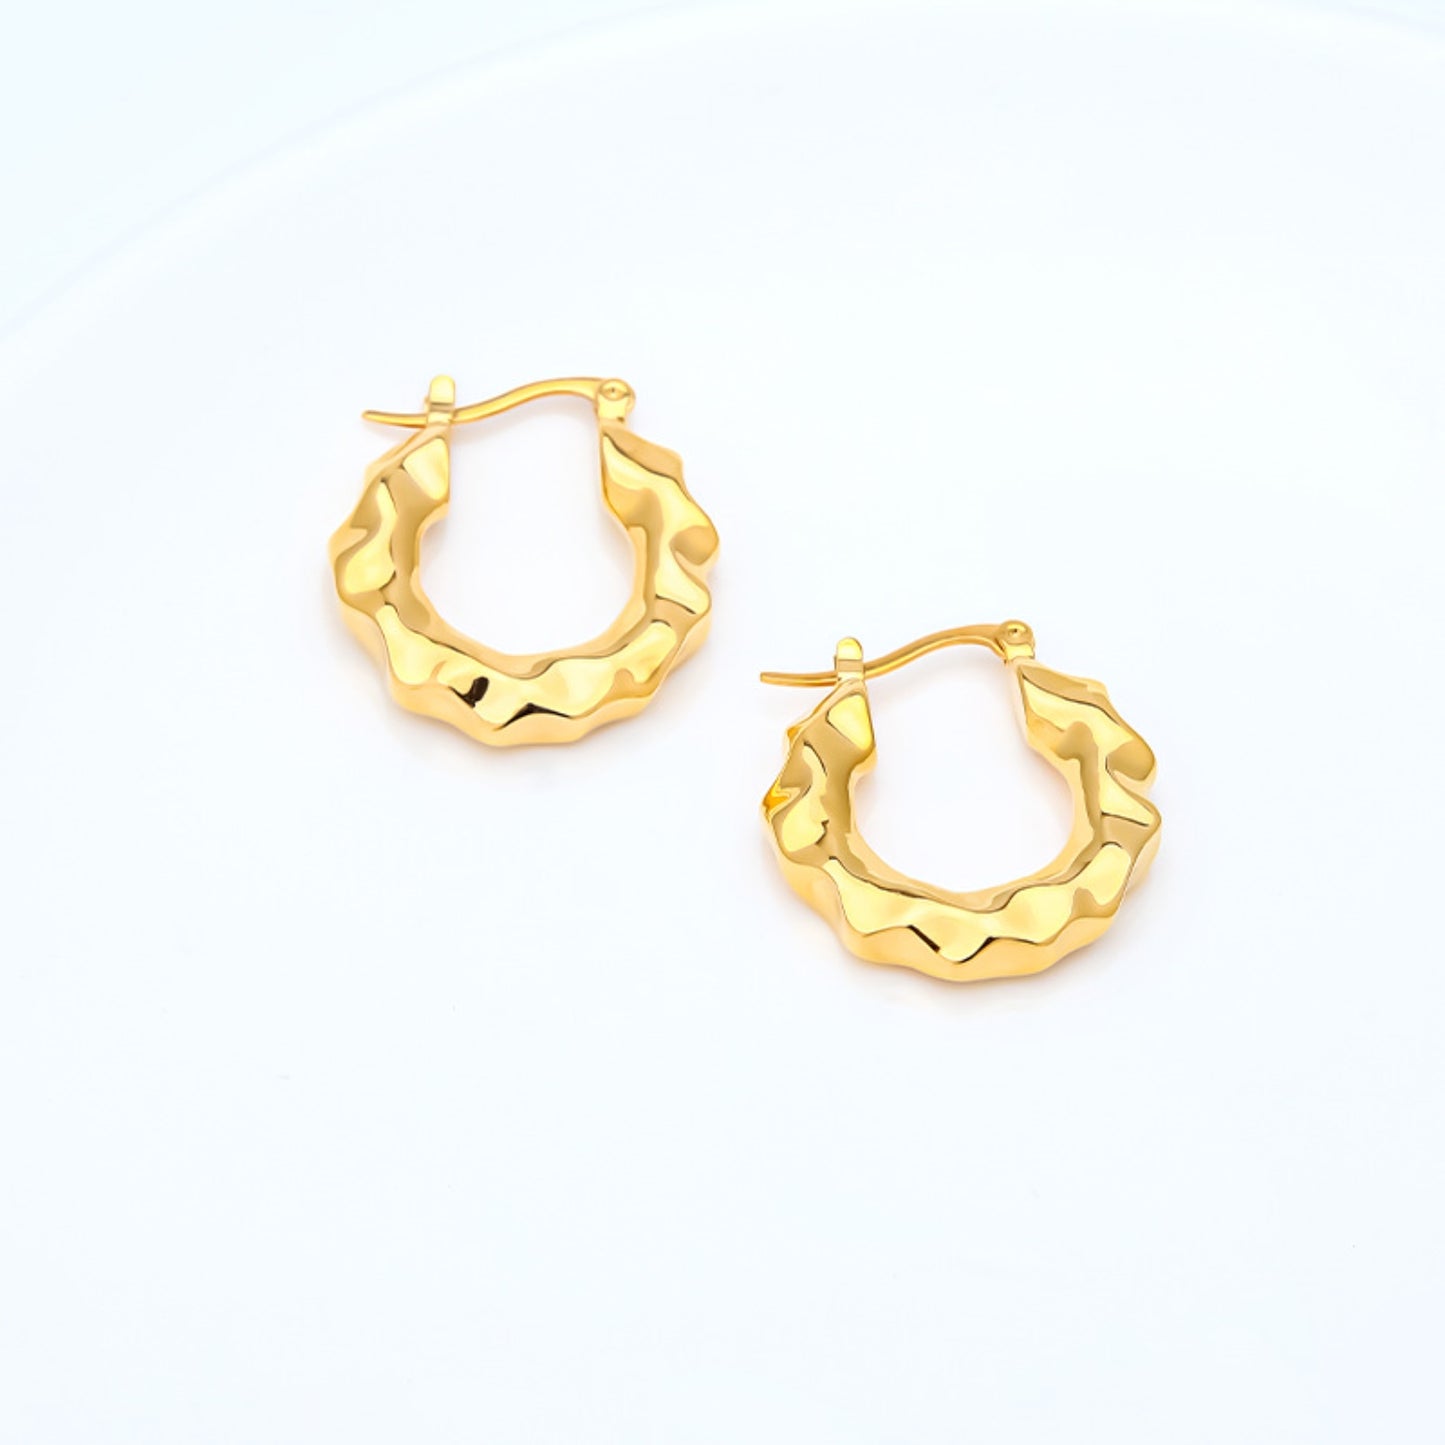 Sophisticated Gold-Plated Huggie Earrings